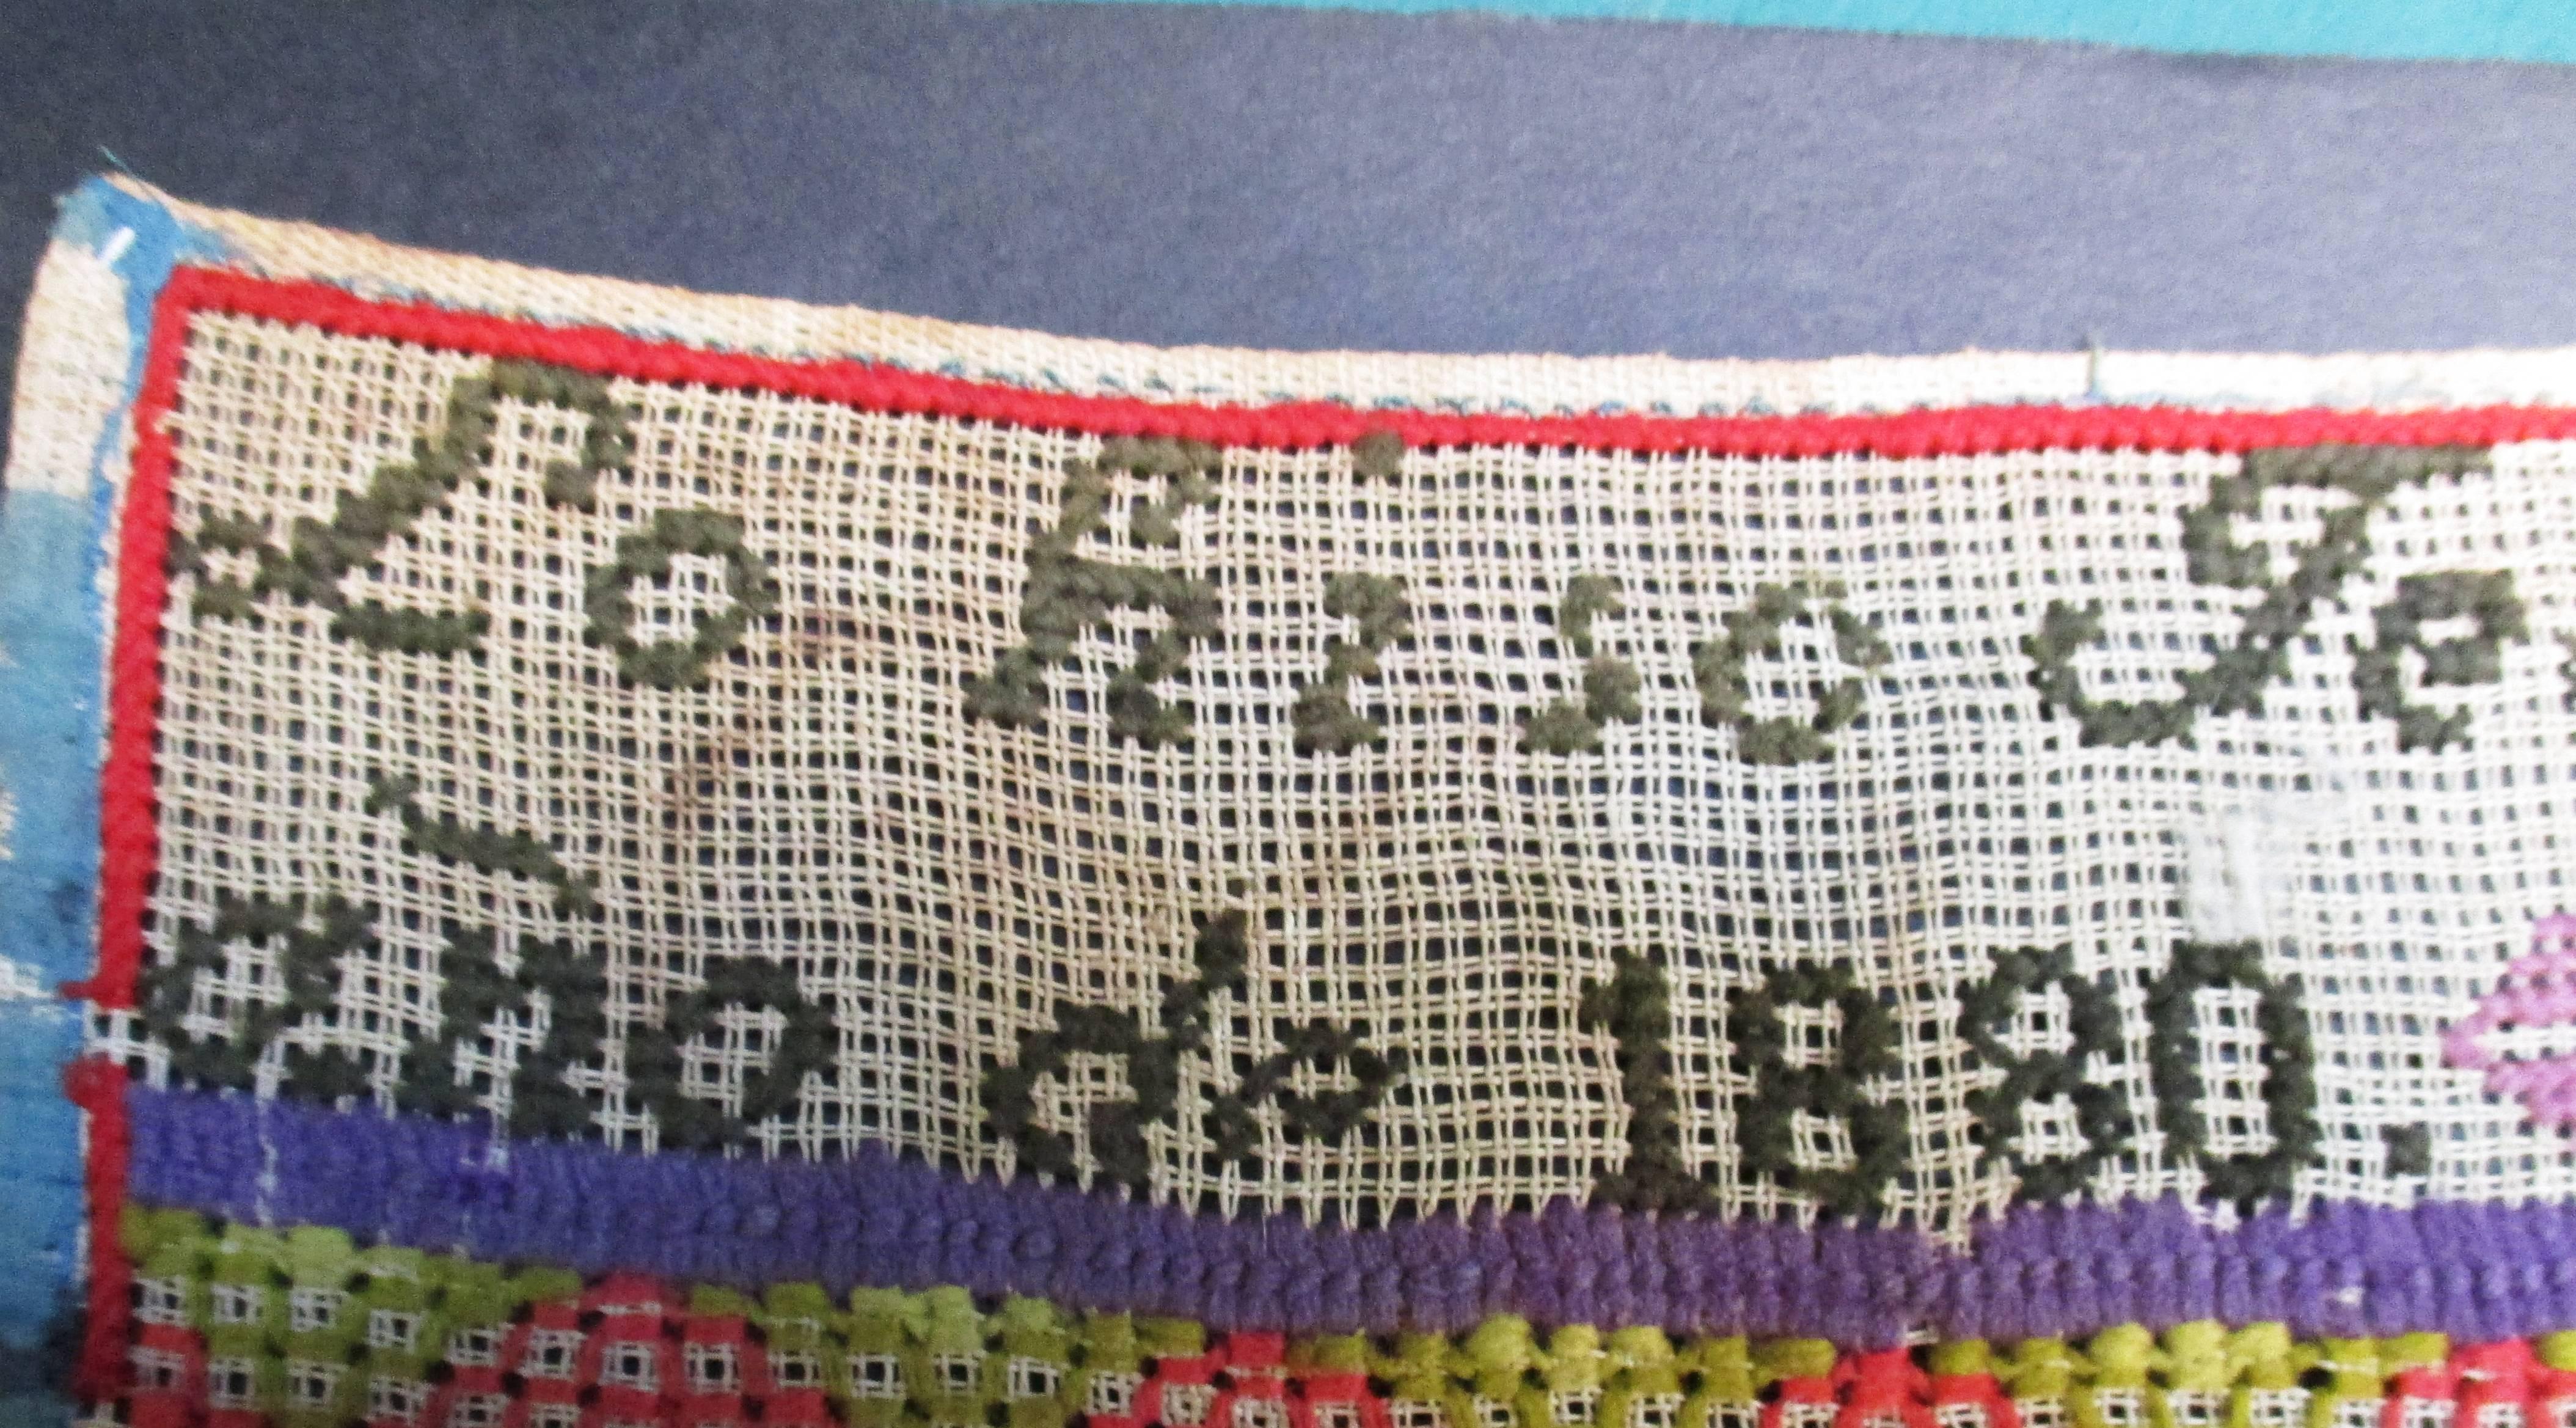 19th Century Mexican Needlepoint Sampler, Dated 1880, Colorful and Elaborate For Sale 1